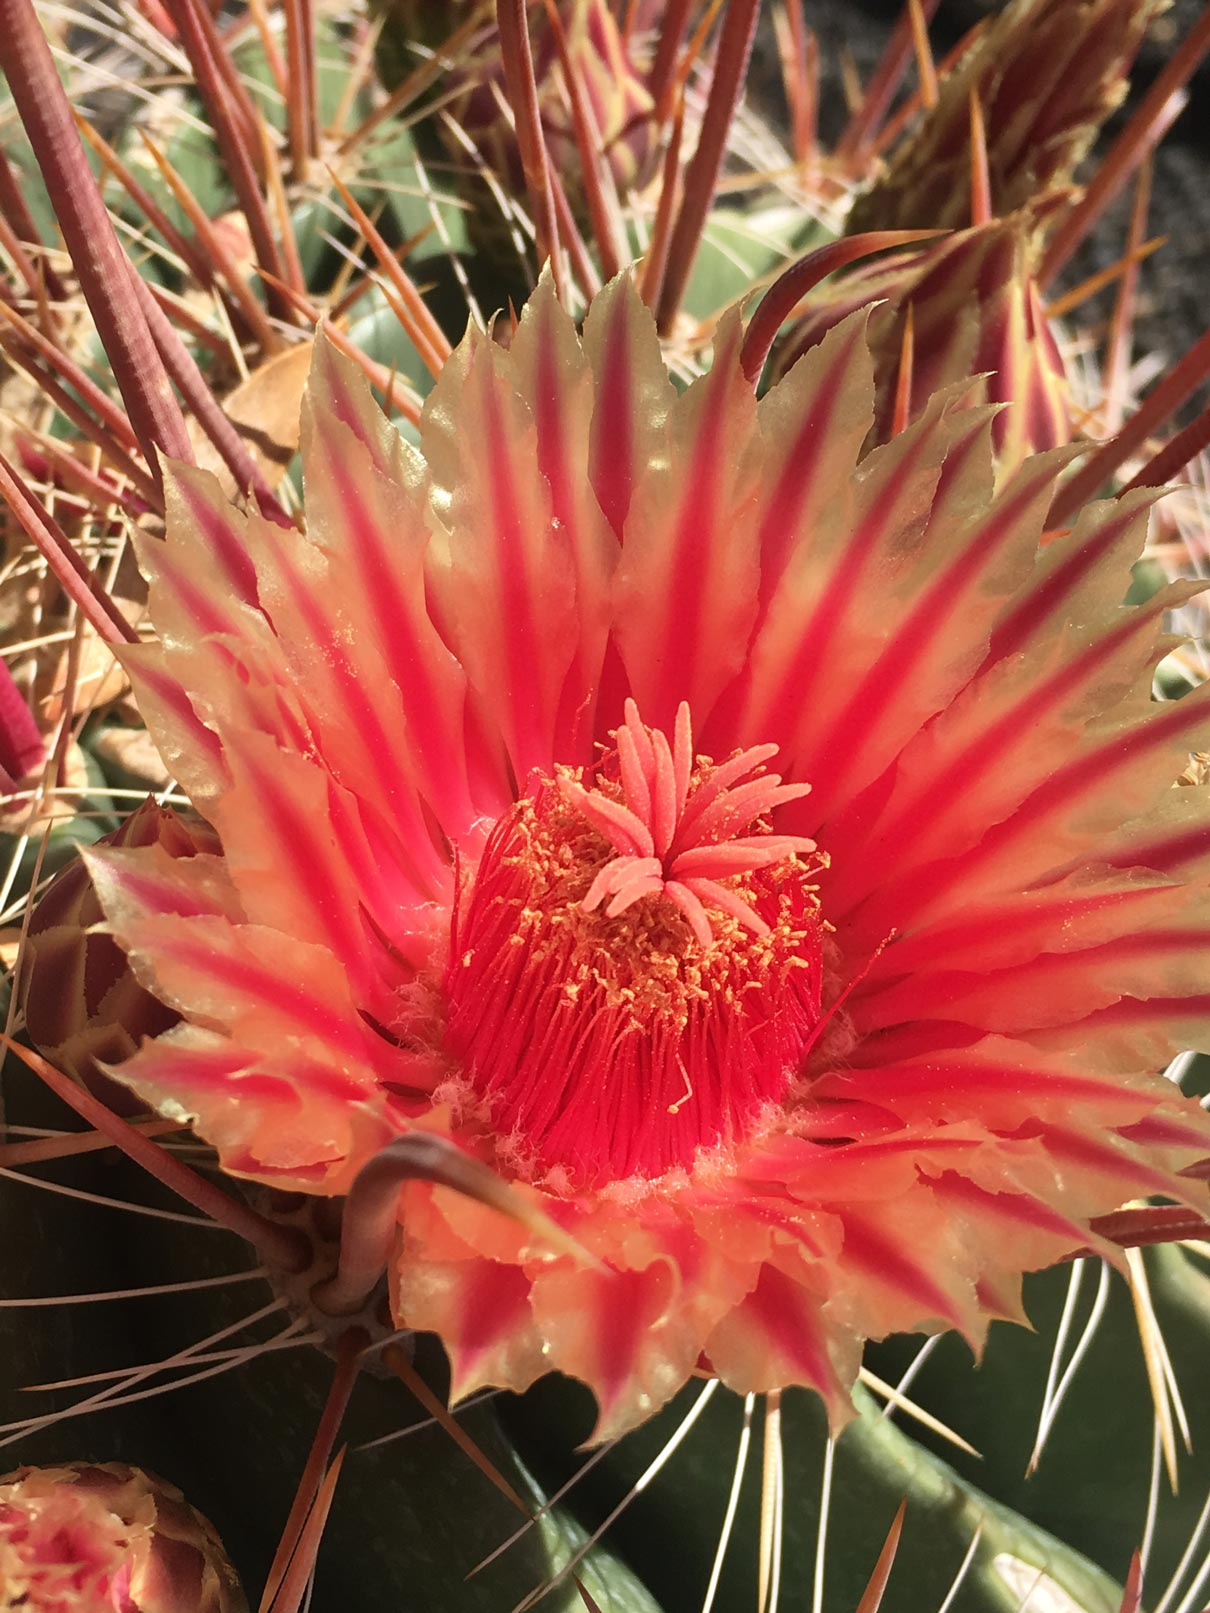 A close-up of a coral Fish Hook Cactus flower.